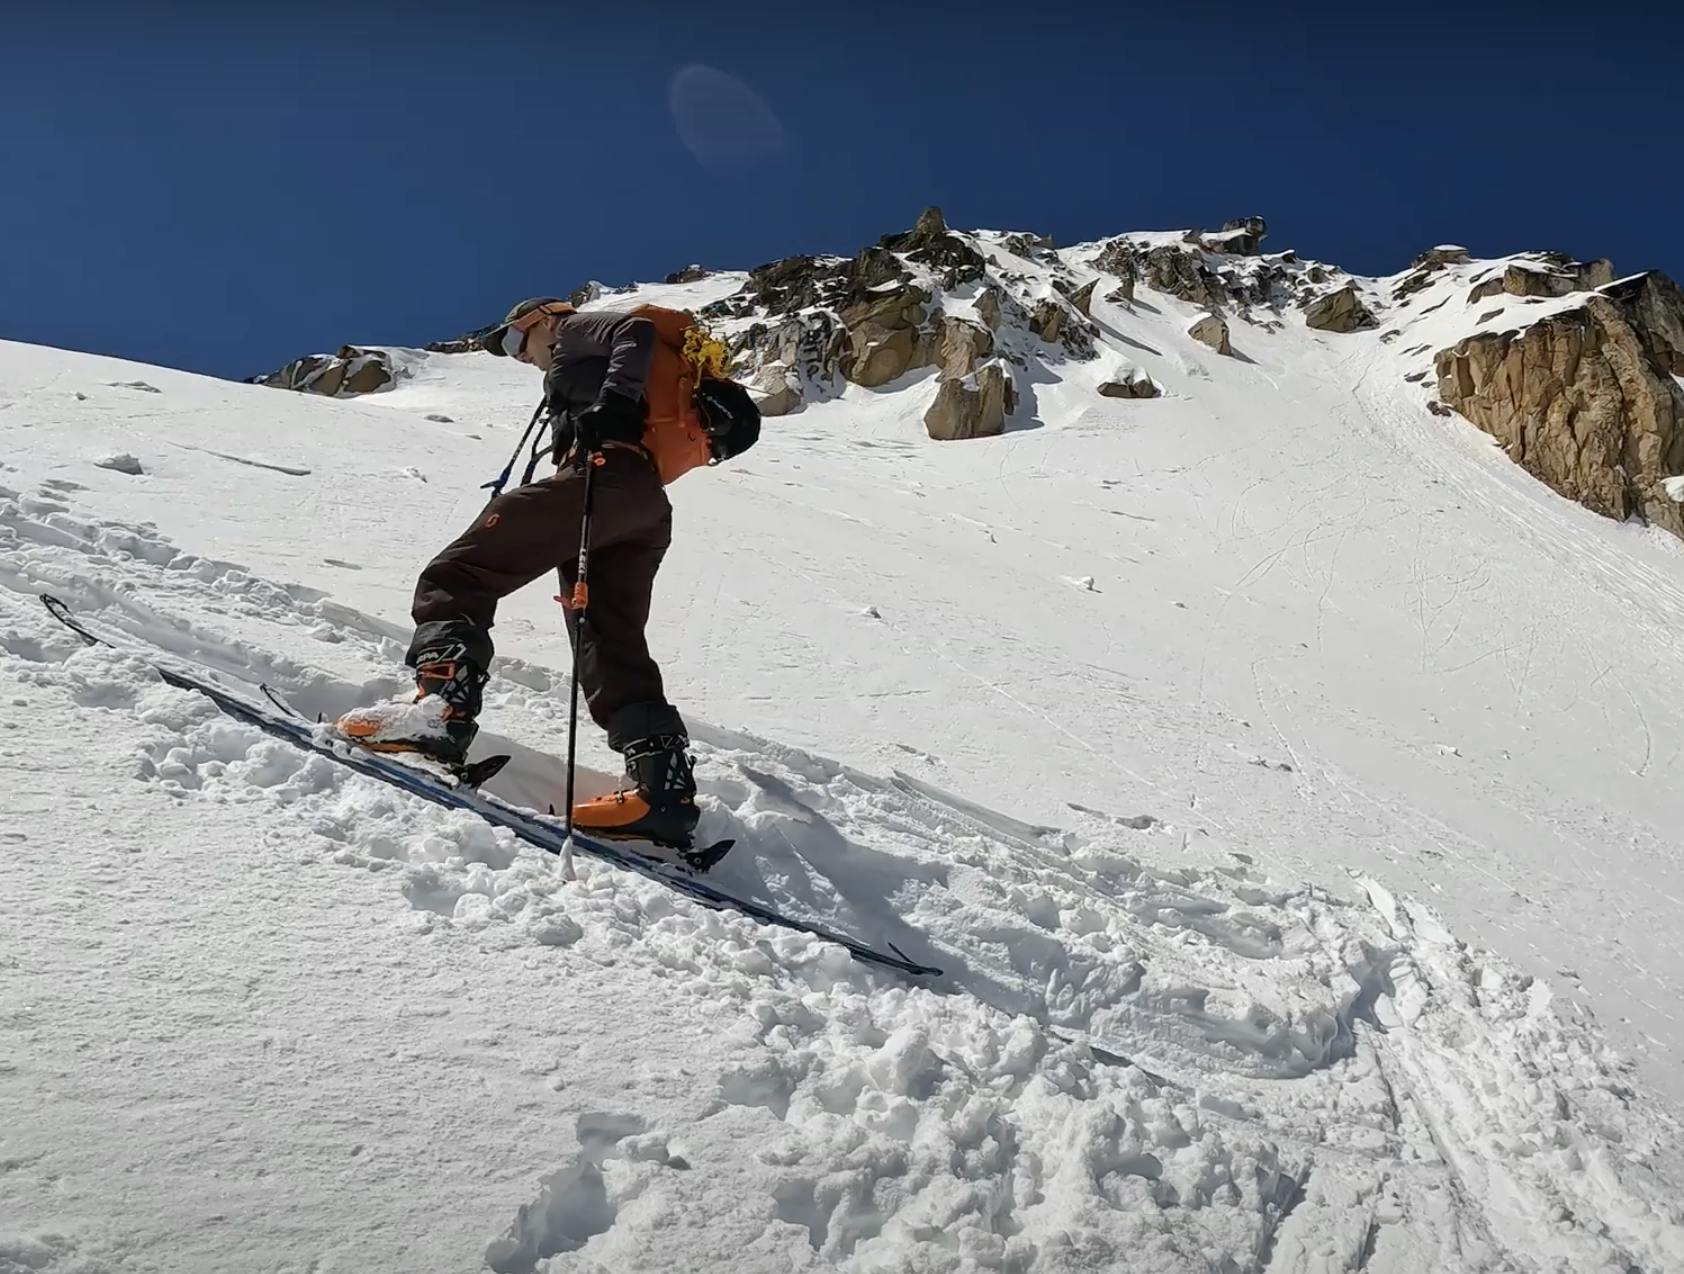 A skier skinning up a steep hill.